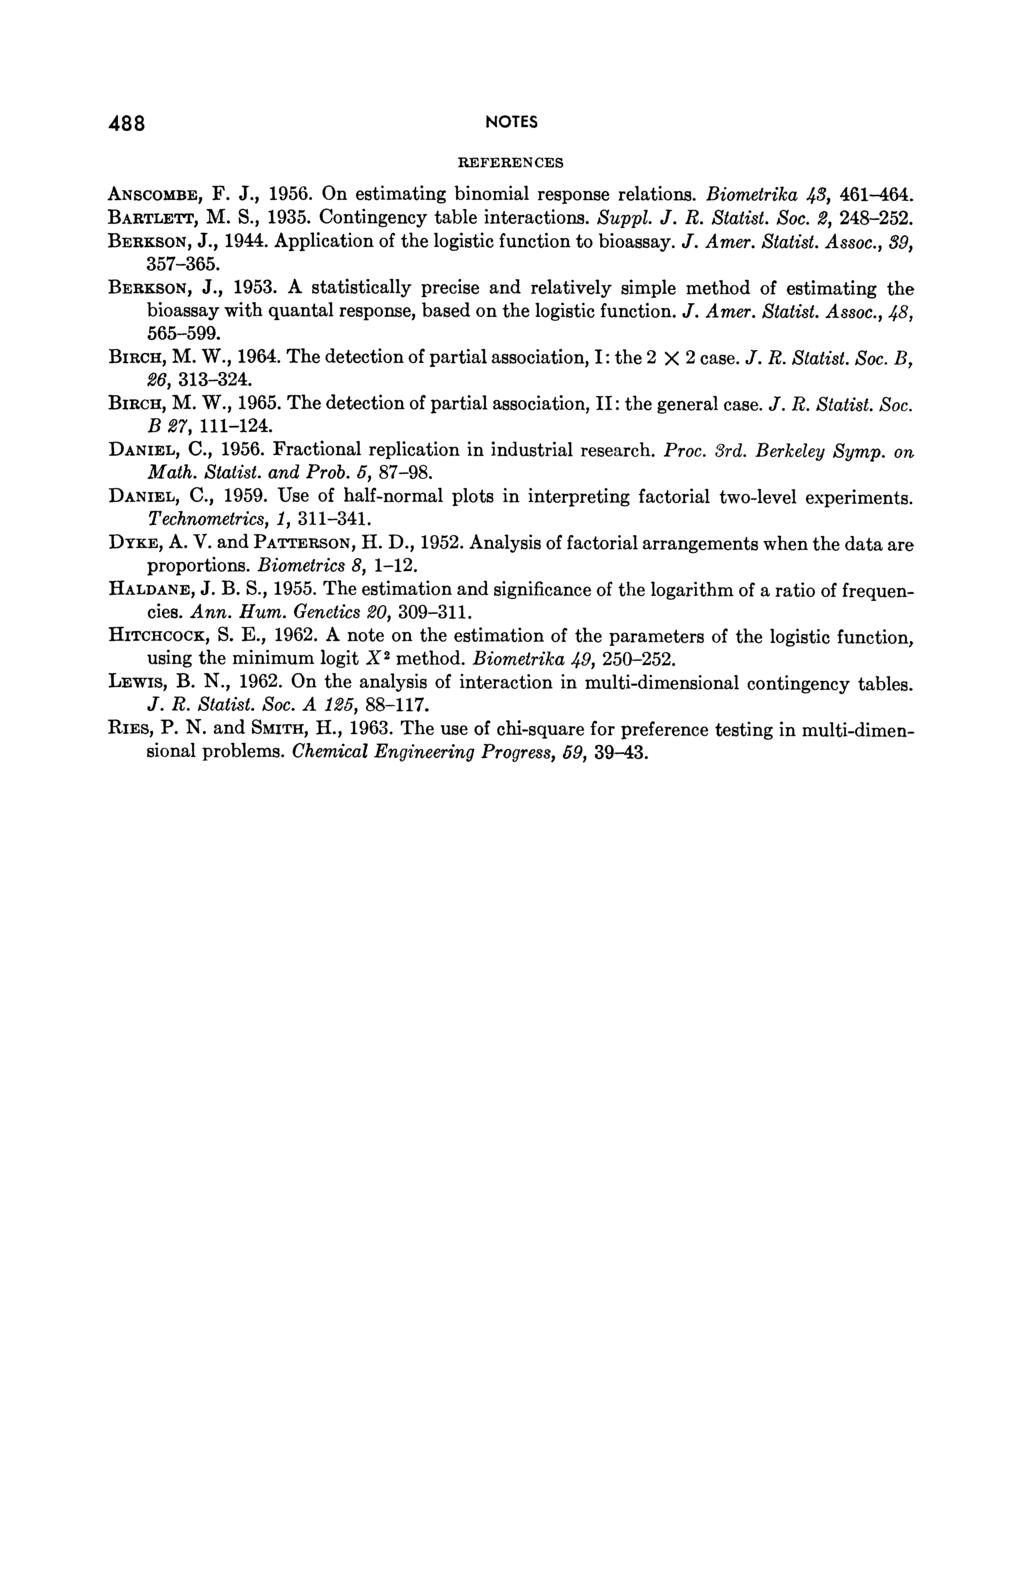 488 NOTES REFERENCES ANSCOMBE, F. J., 1956. On estimating binomial response relations. Bio BARTLETT, M. S., 1935. Contingency table interactions. Suppl. J. R. S BERKSON, J., 1944.